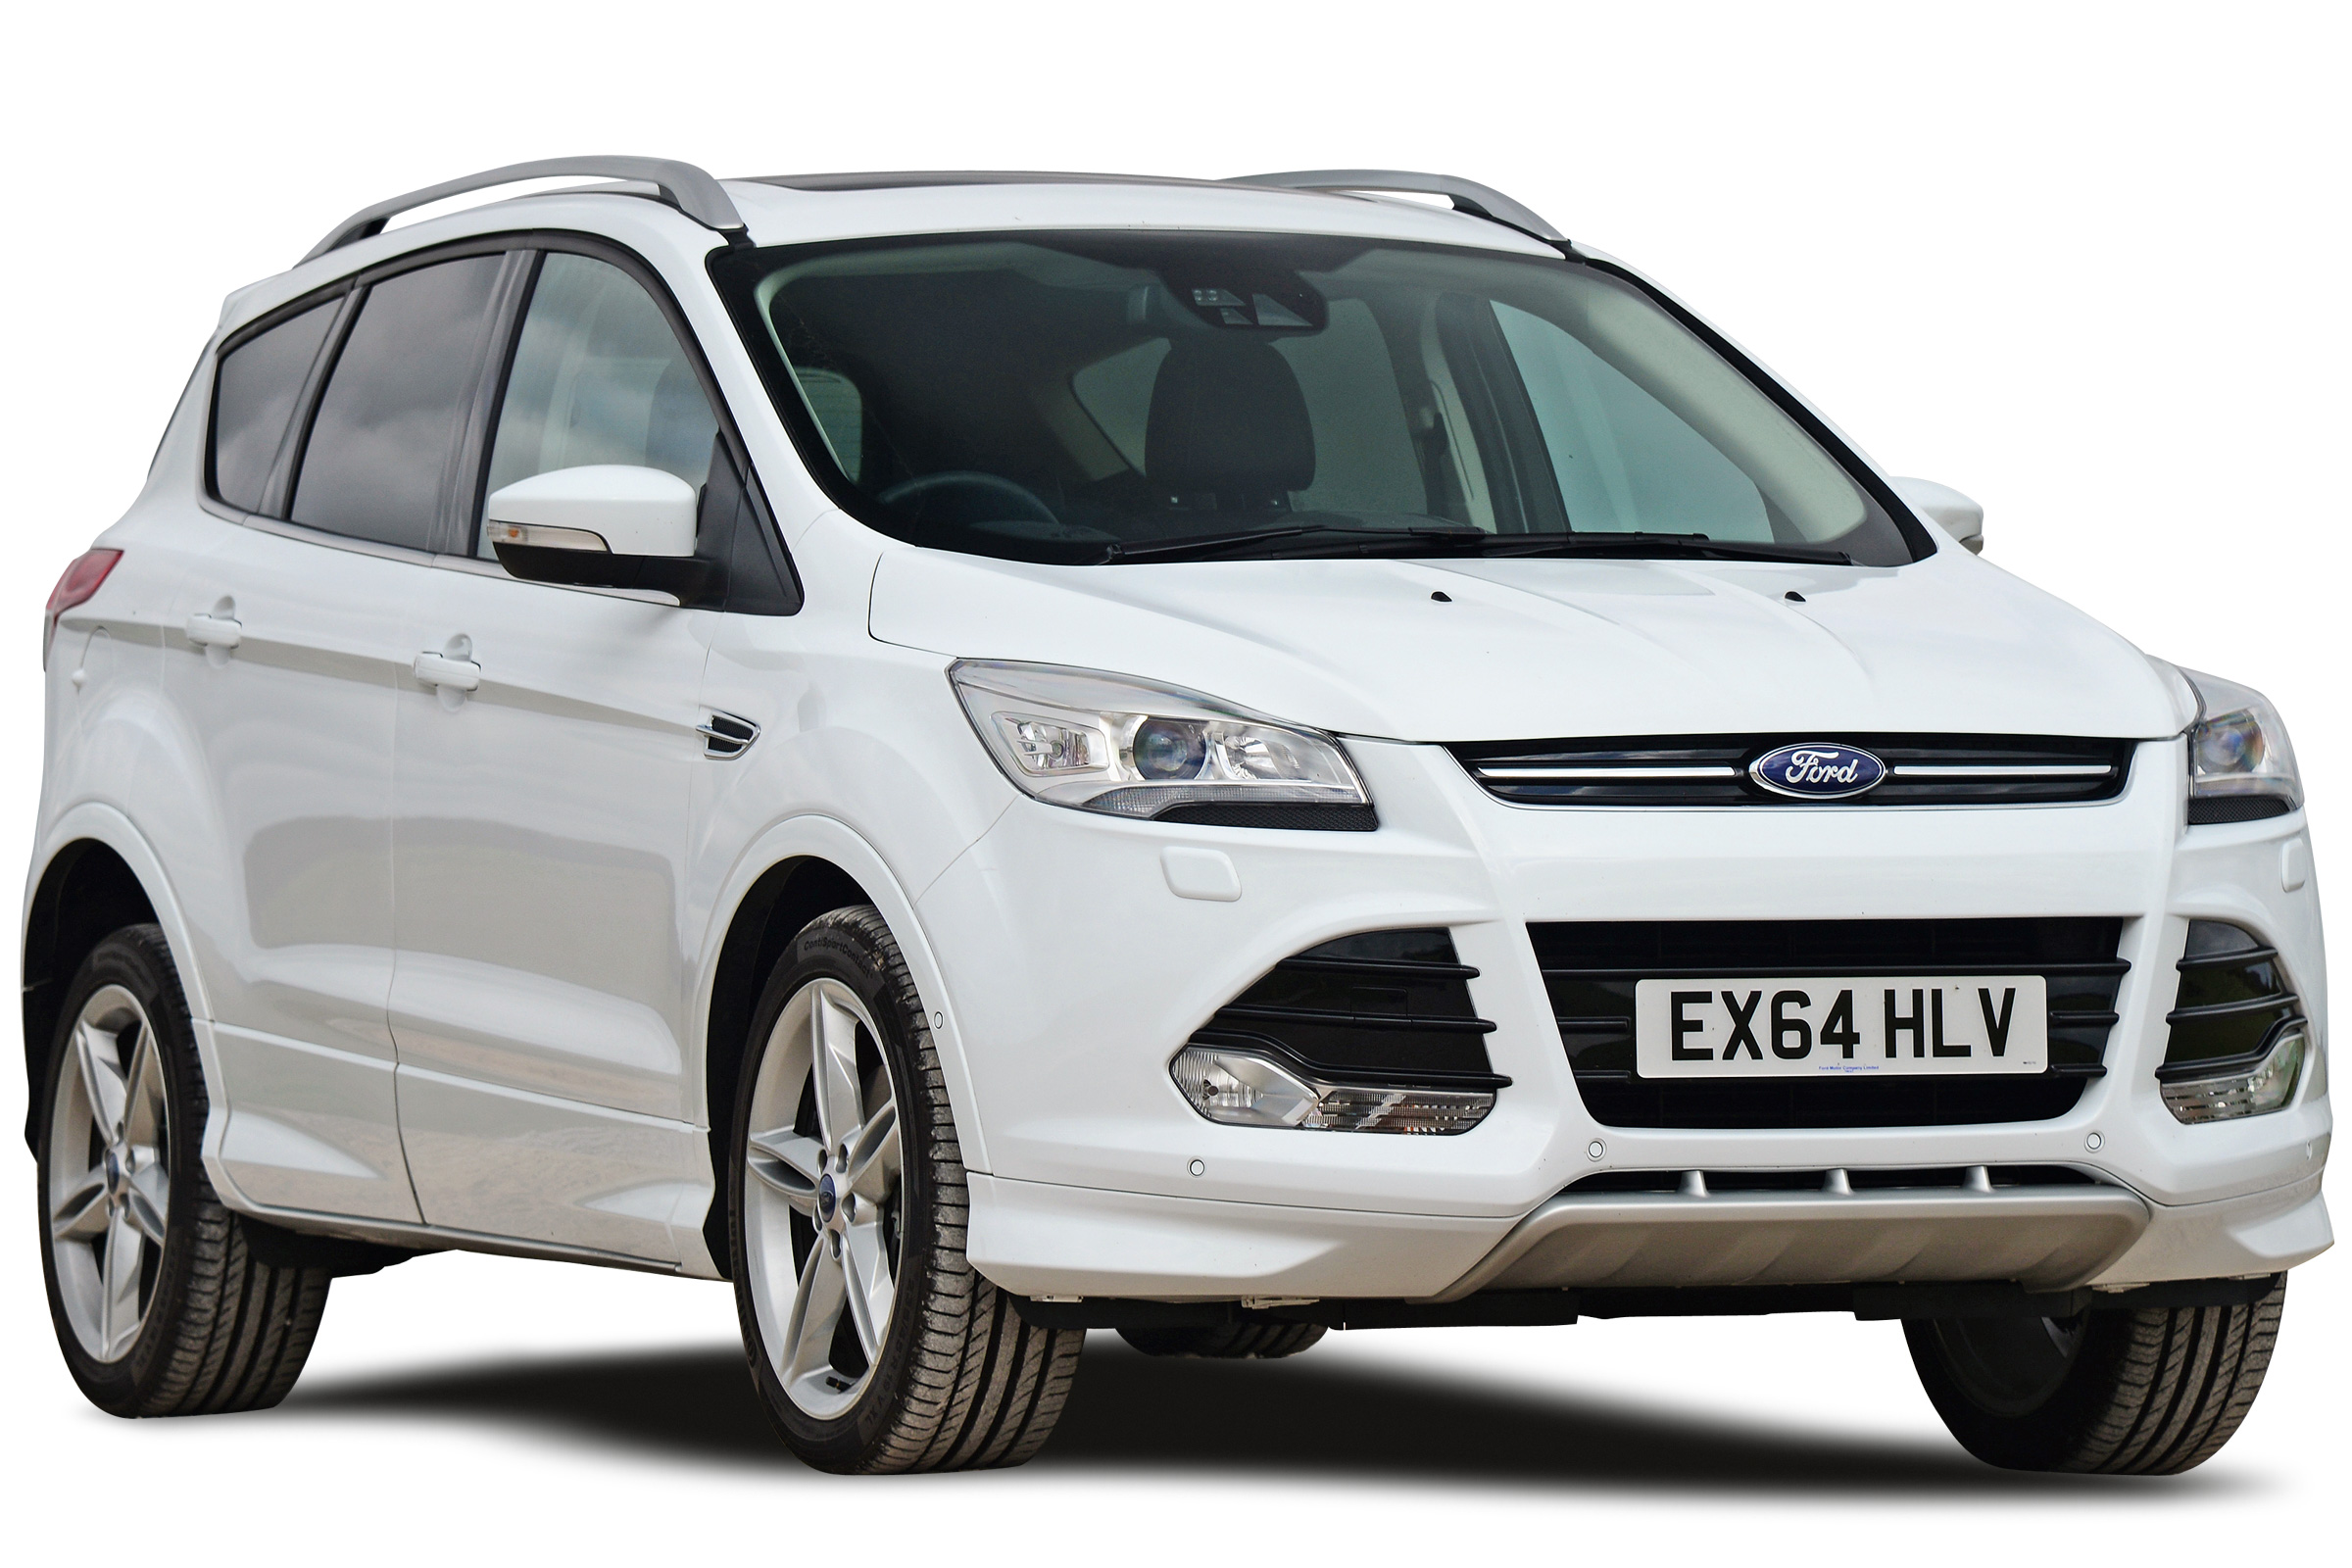 Remapping file for Ford Kuga 2.0 TDCI 140hp